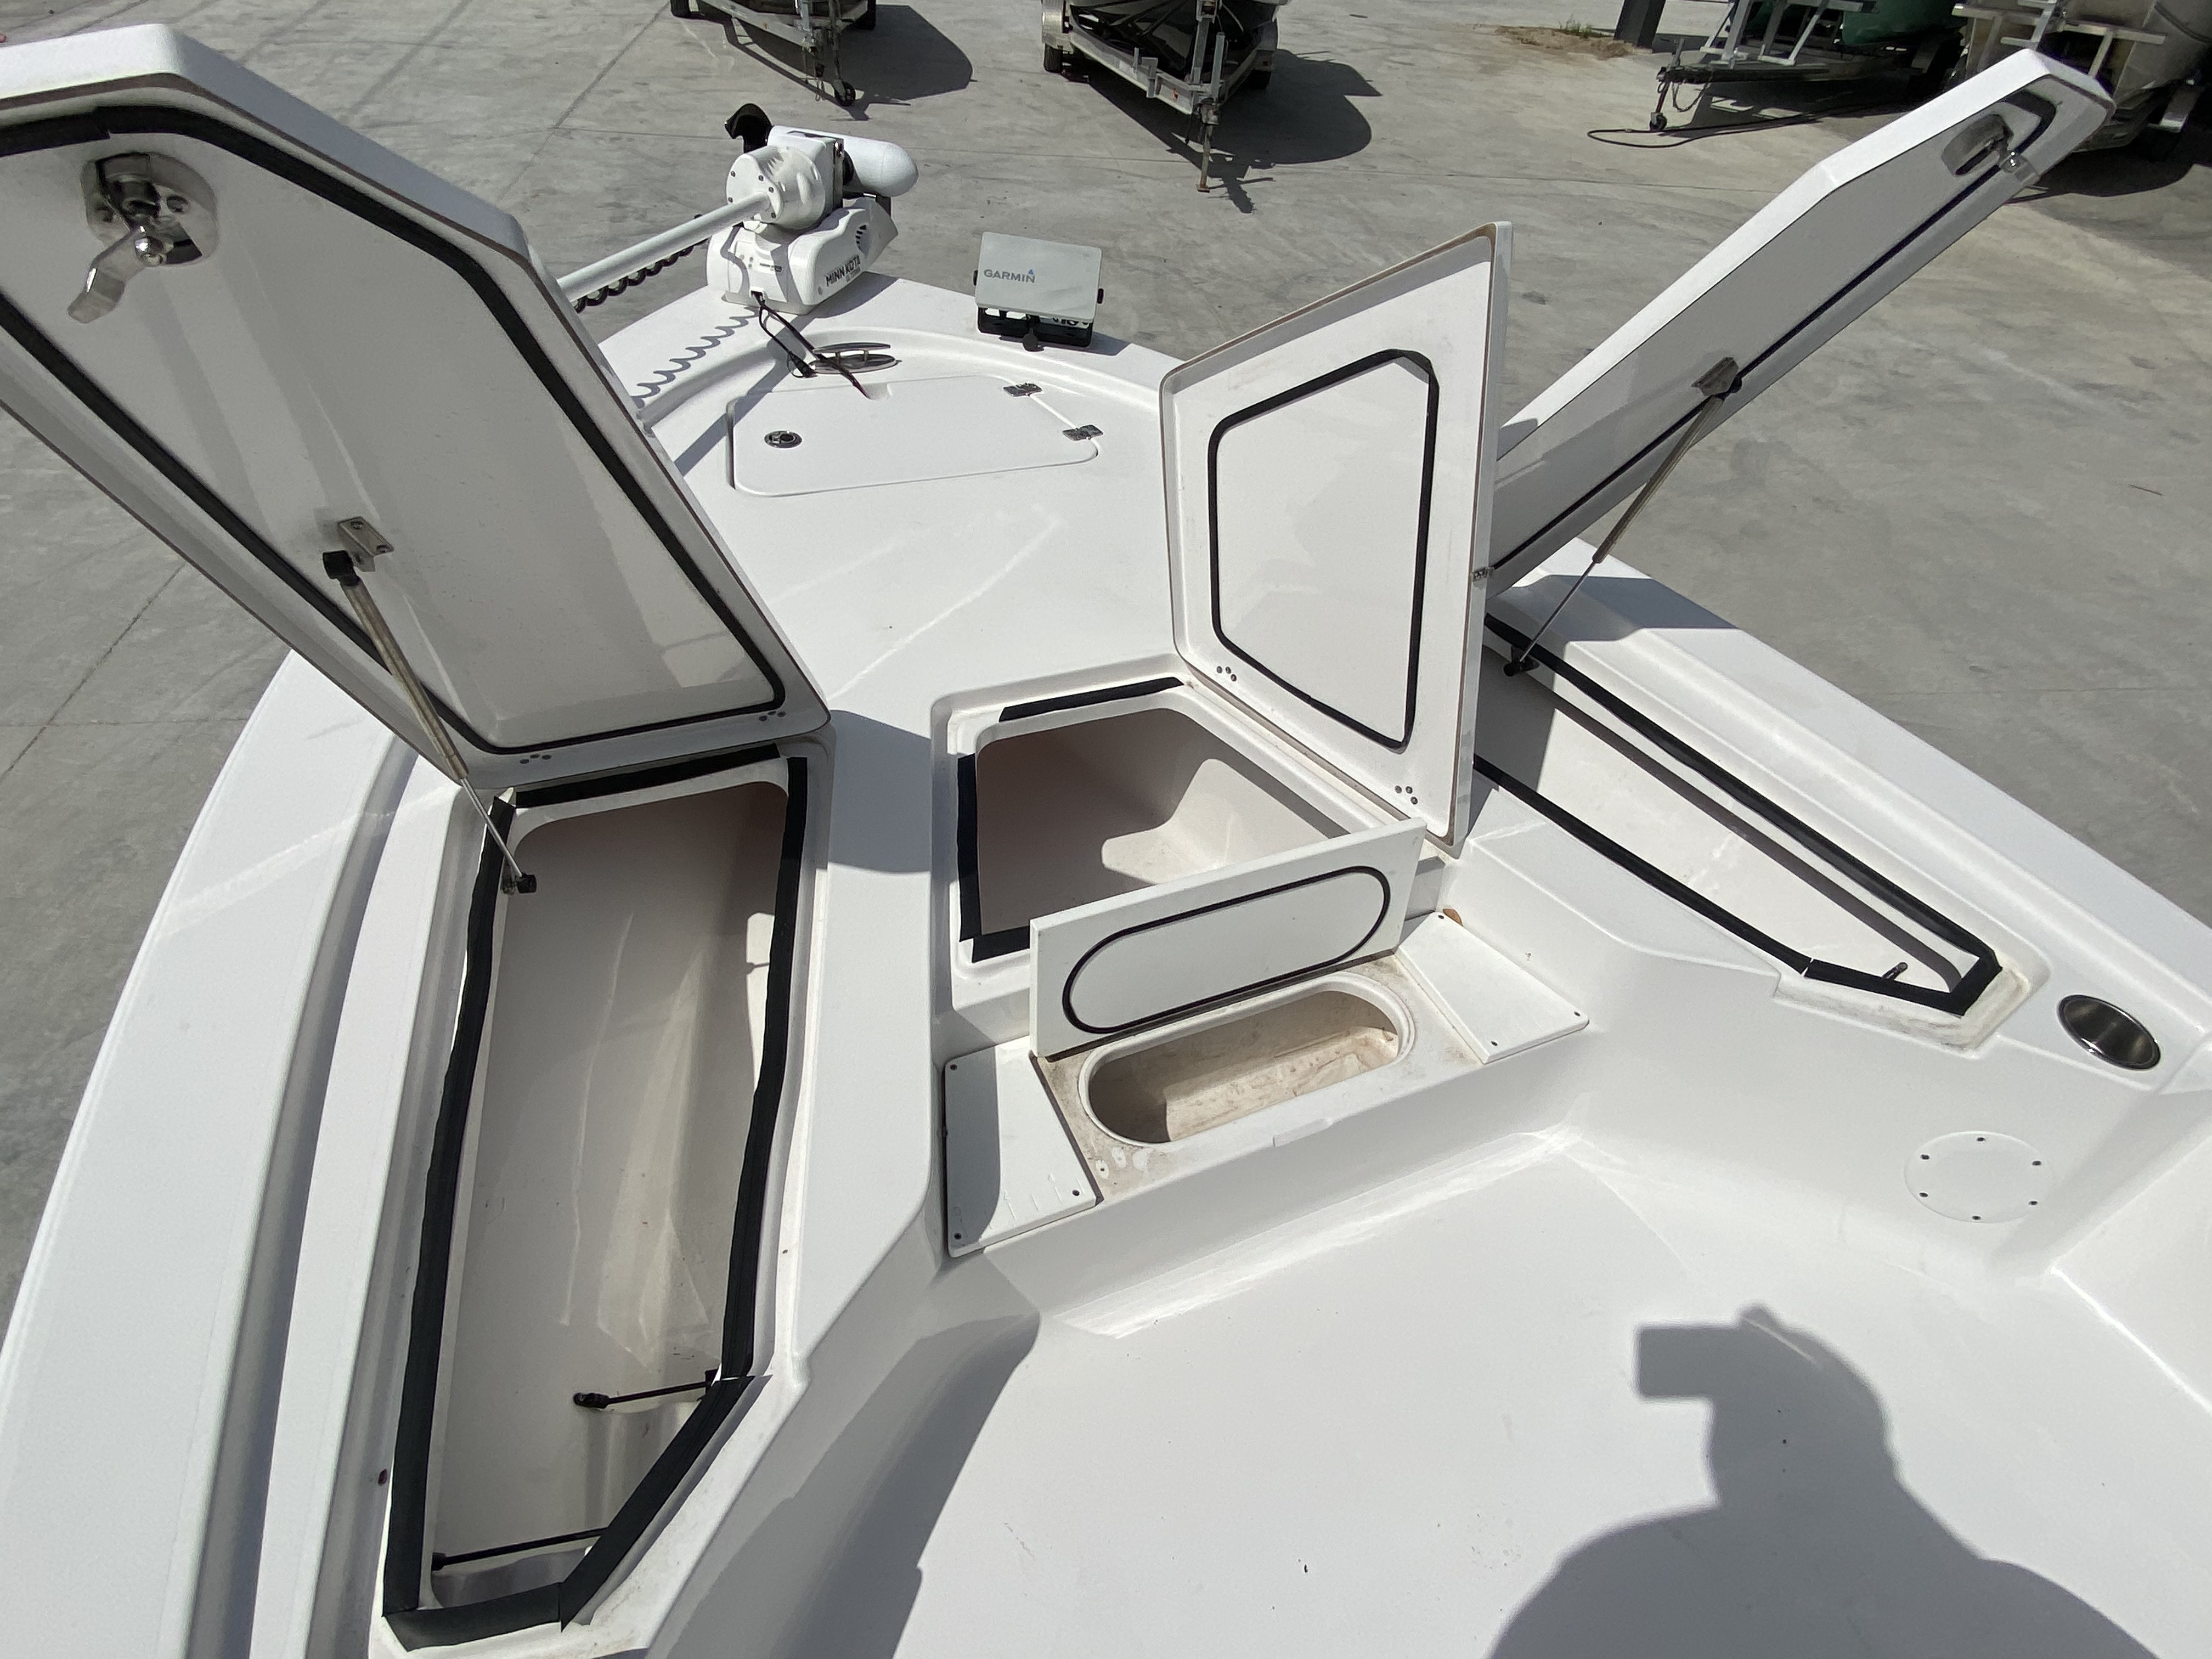 2019 Sportsman Boats boat for sale, model of the boat is 214 Tournament & Image # 23 of 26